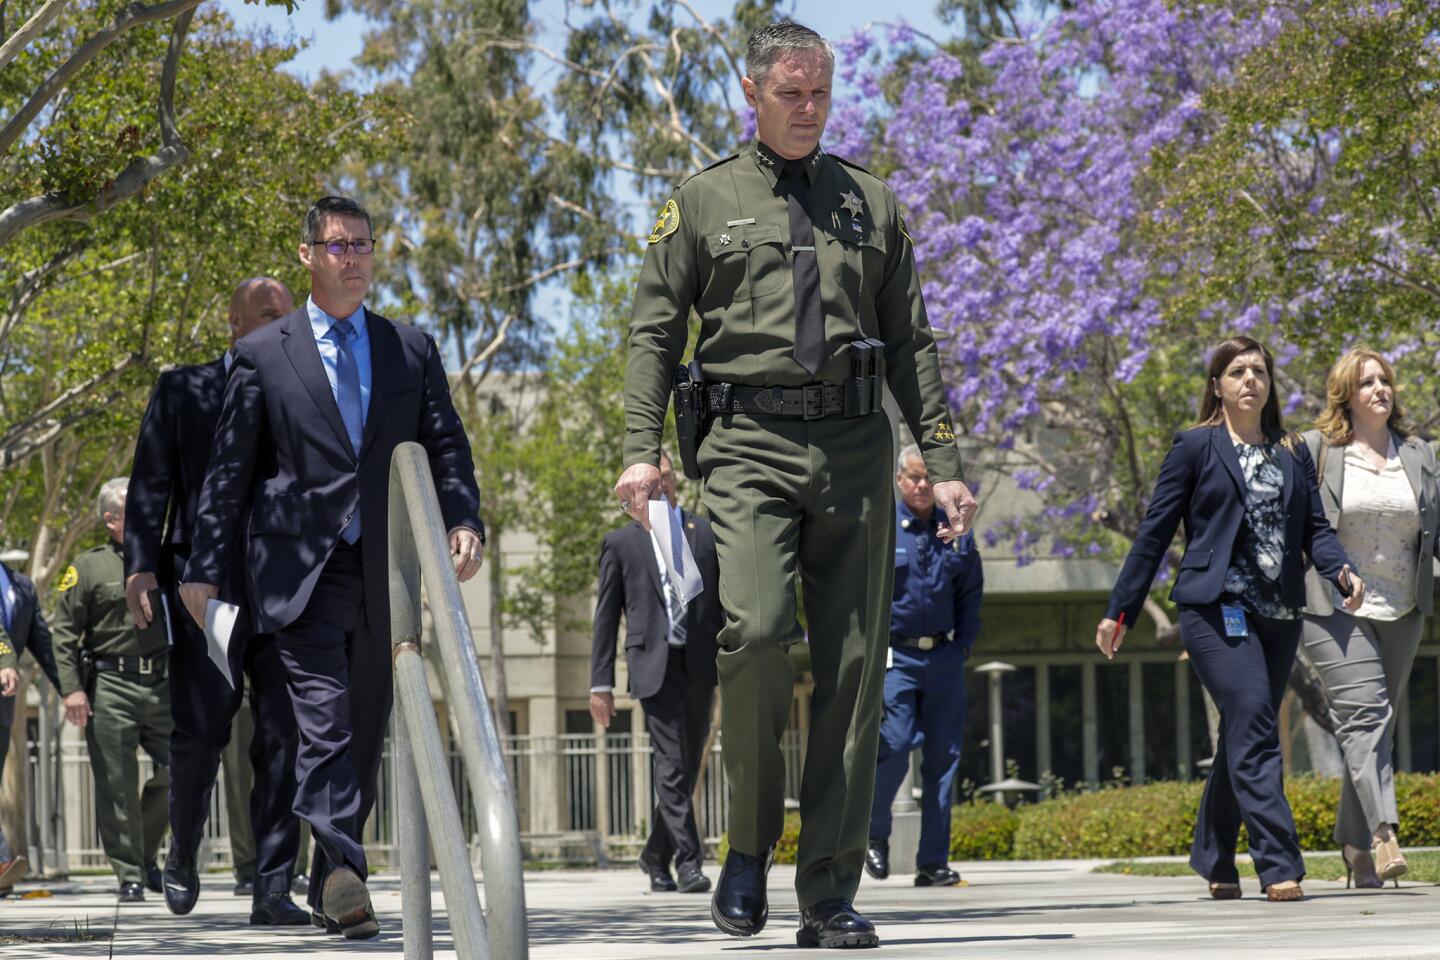 Orange County Undersheriff Don Barnes, center, and Paul Delacourt, left, assistant director of the local FBI field office, head for a news conference Wednesday to discuss Tuesday's fatal explosion in Aliso Viejo.